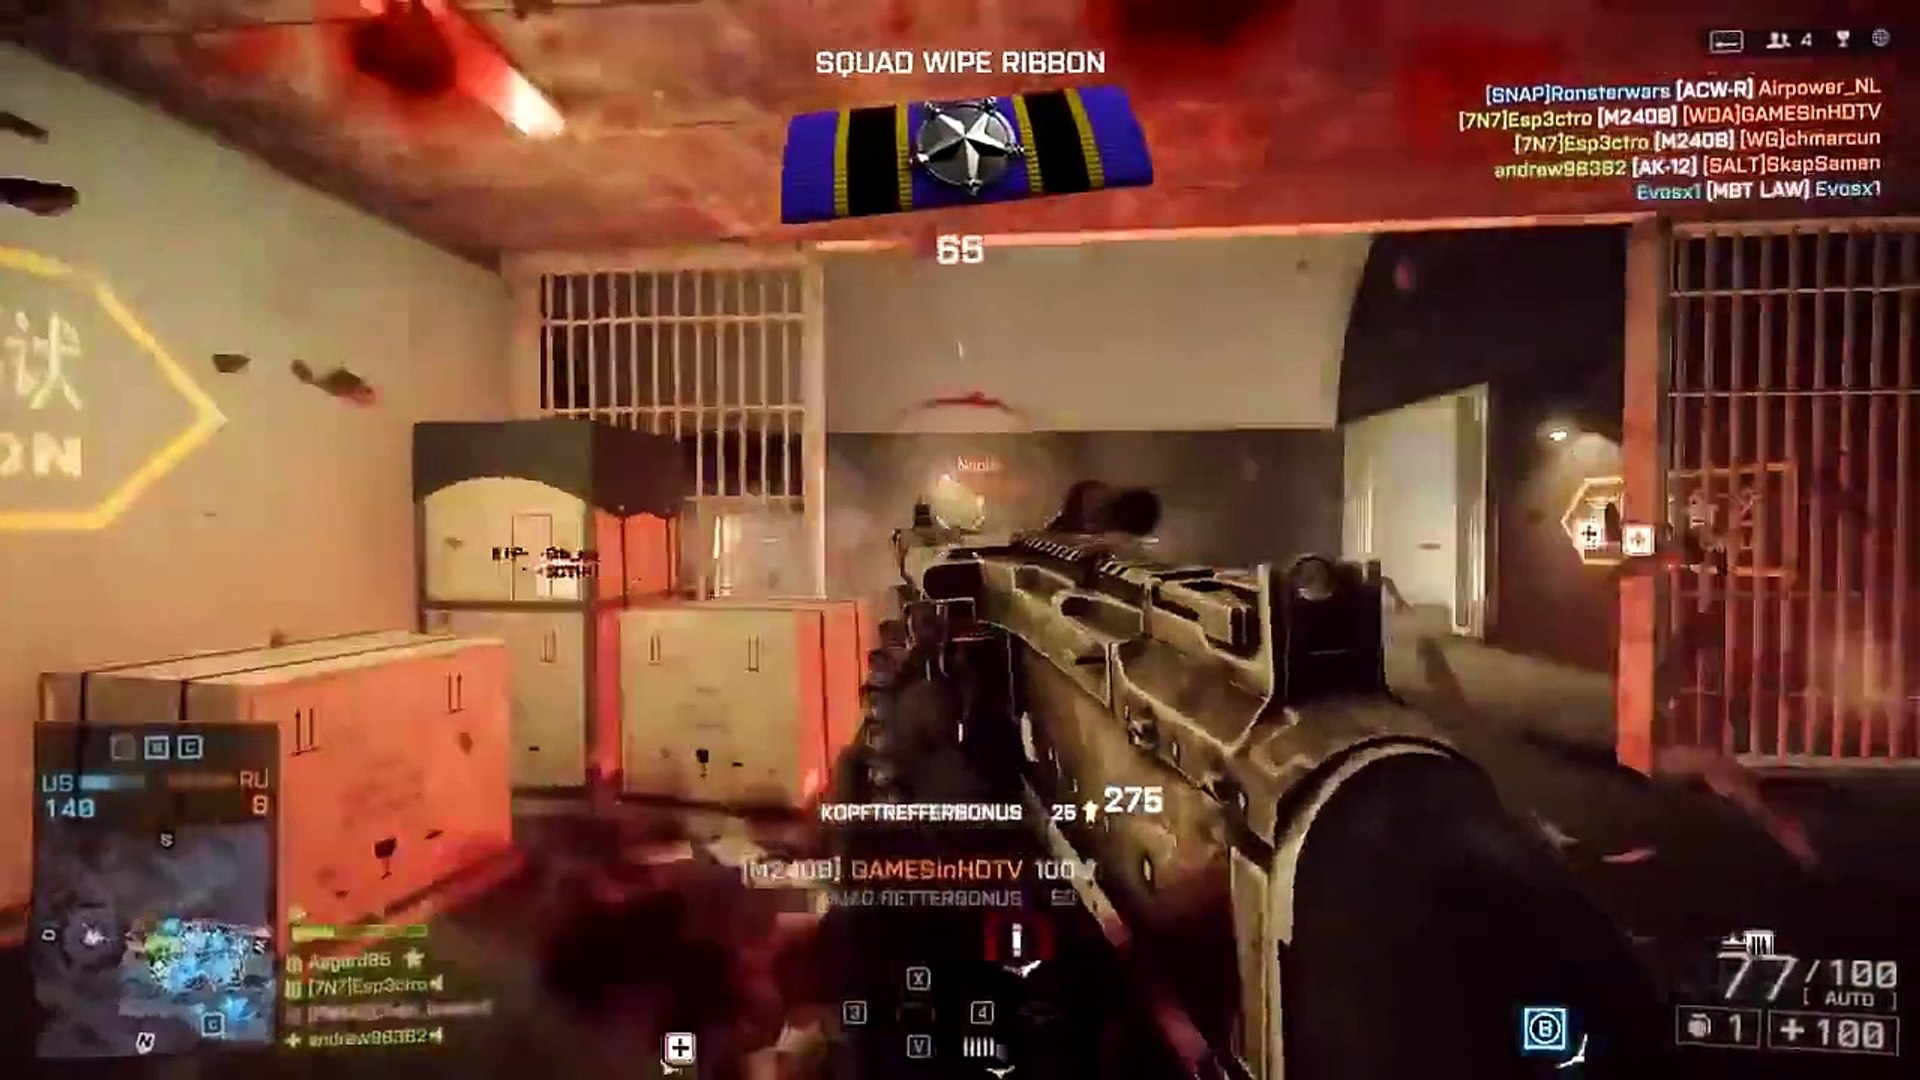 [BF4] Battlefield 4 Aimbot! Full Undetected! - 